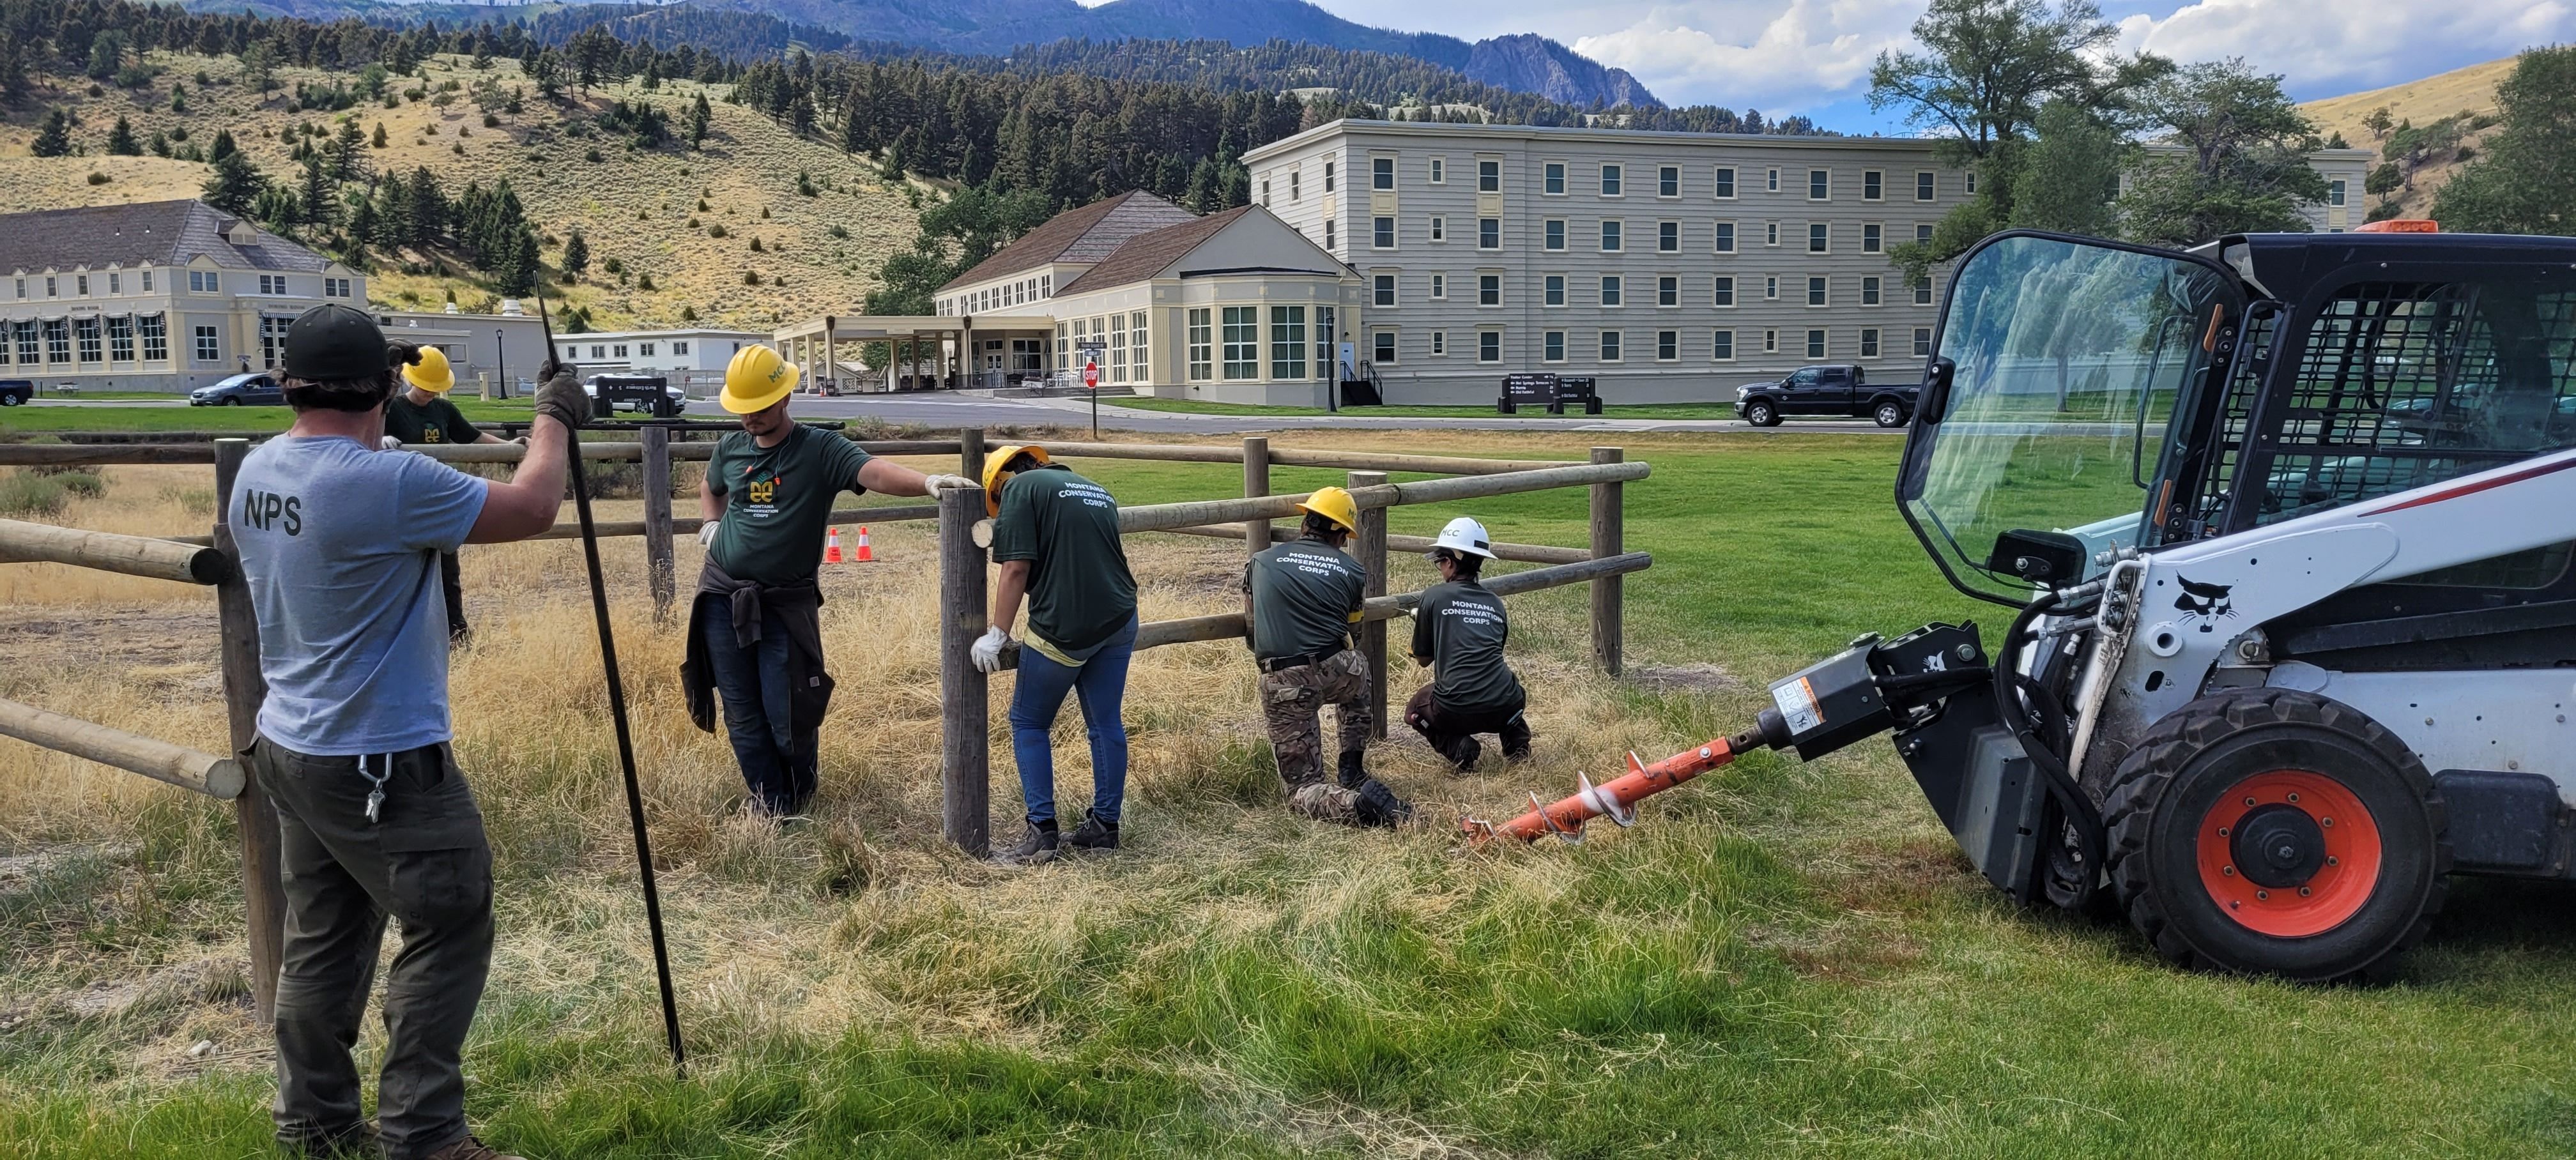 A youth crew repairs a fence in Mammoth in Yellowstone National Park.